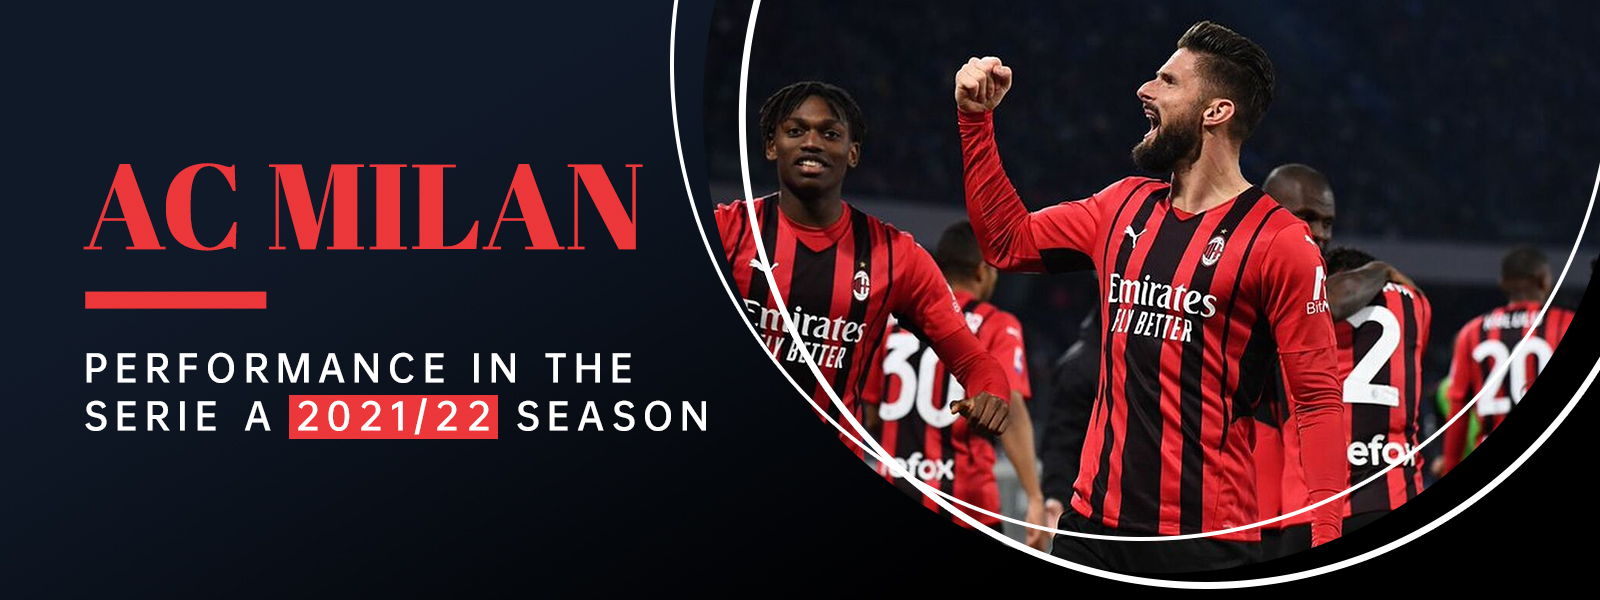 AC Milan Performance In The Serie A 2021/22